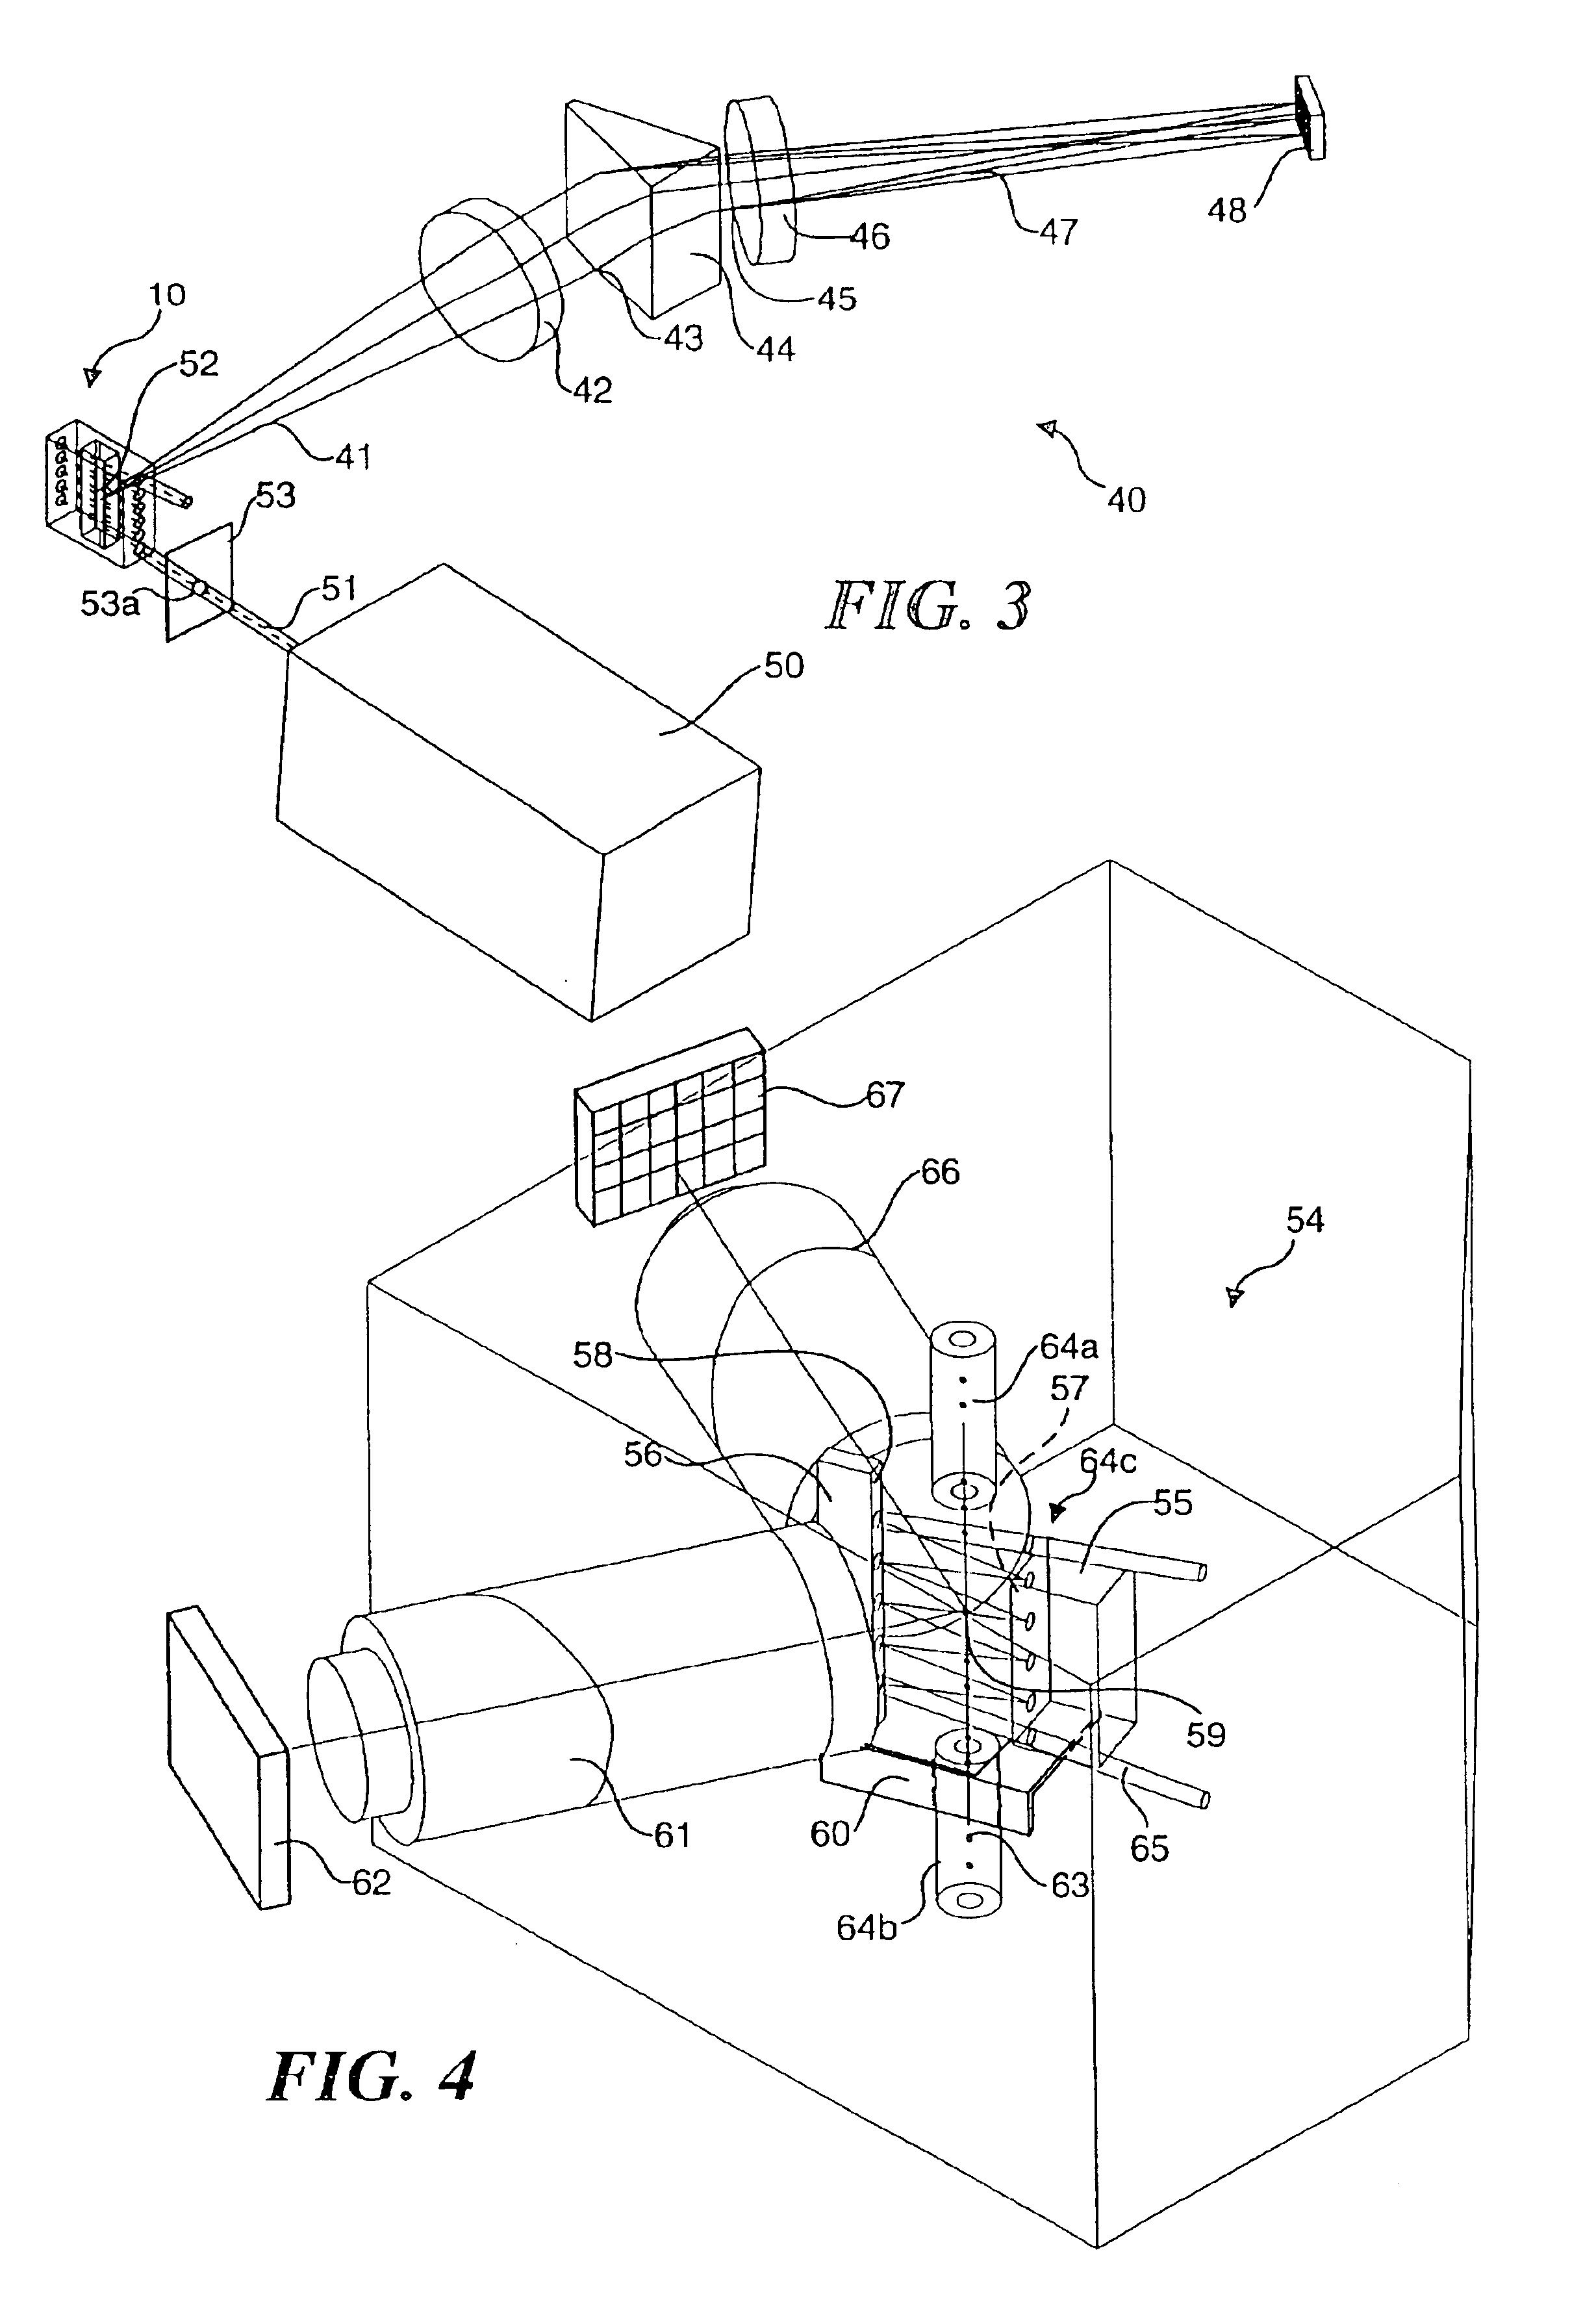 Multipass cavity for illumination and excitation of moving objects